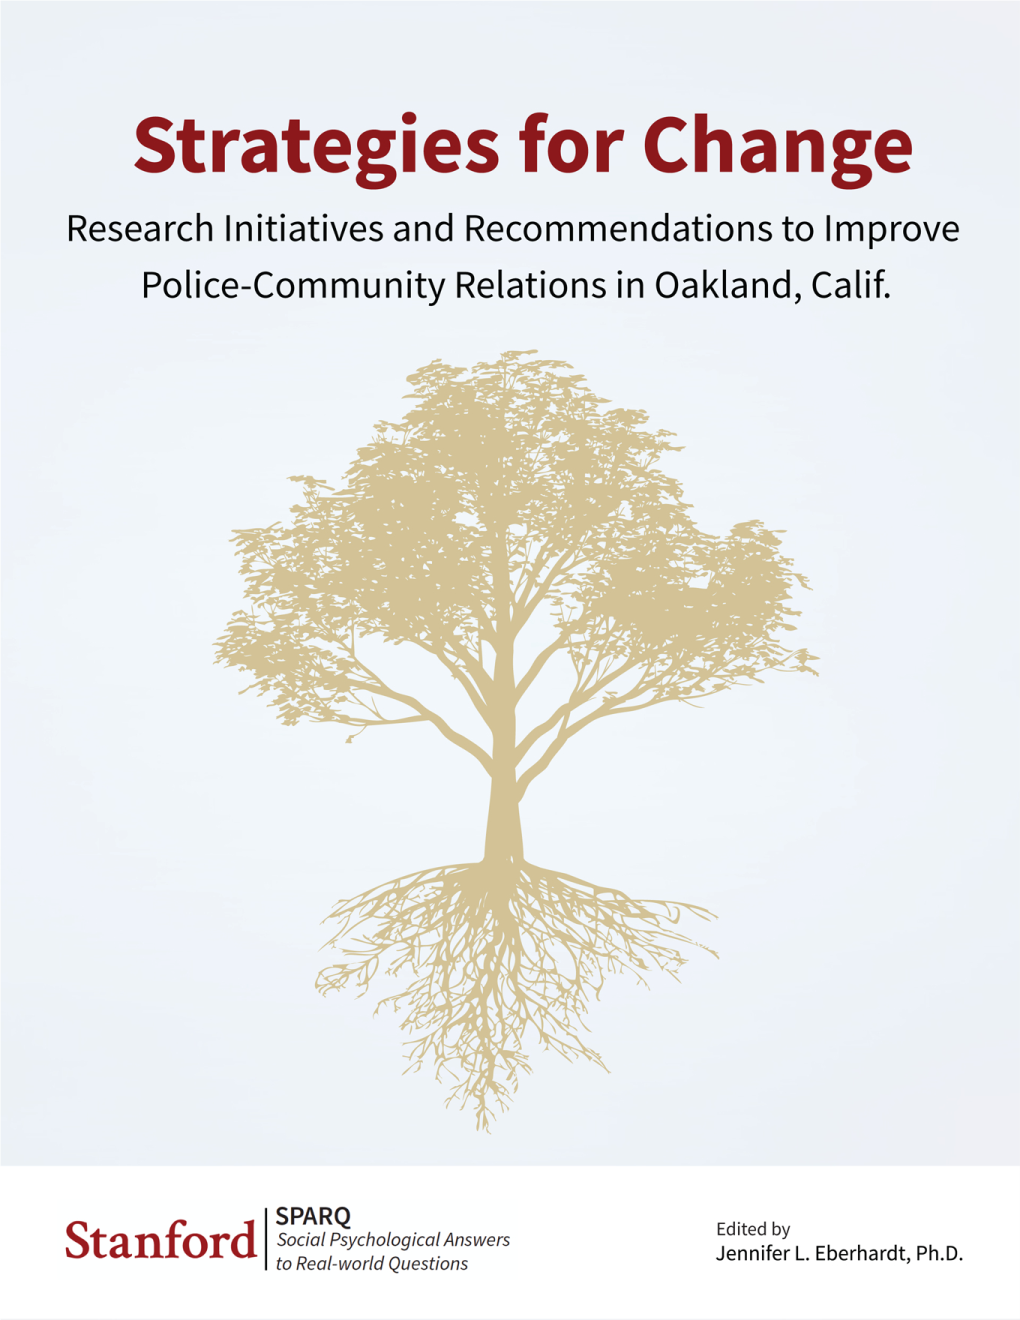 Research Initiatives and Recommendations to Improve Police-Community Relations in Oakland, Calif